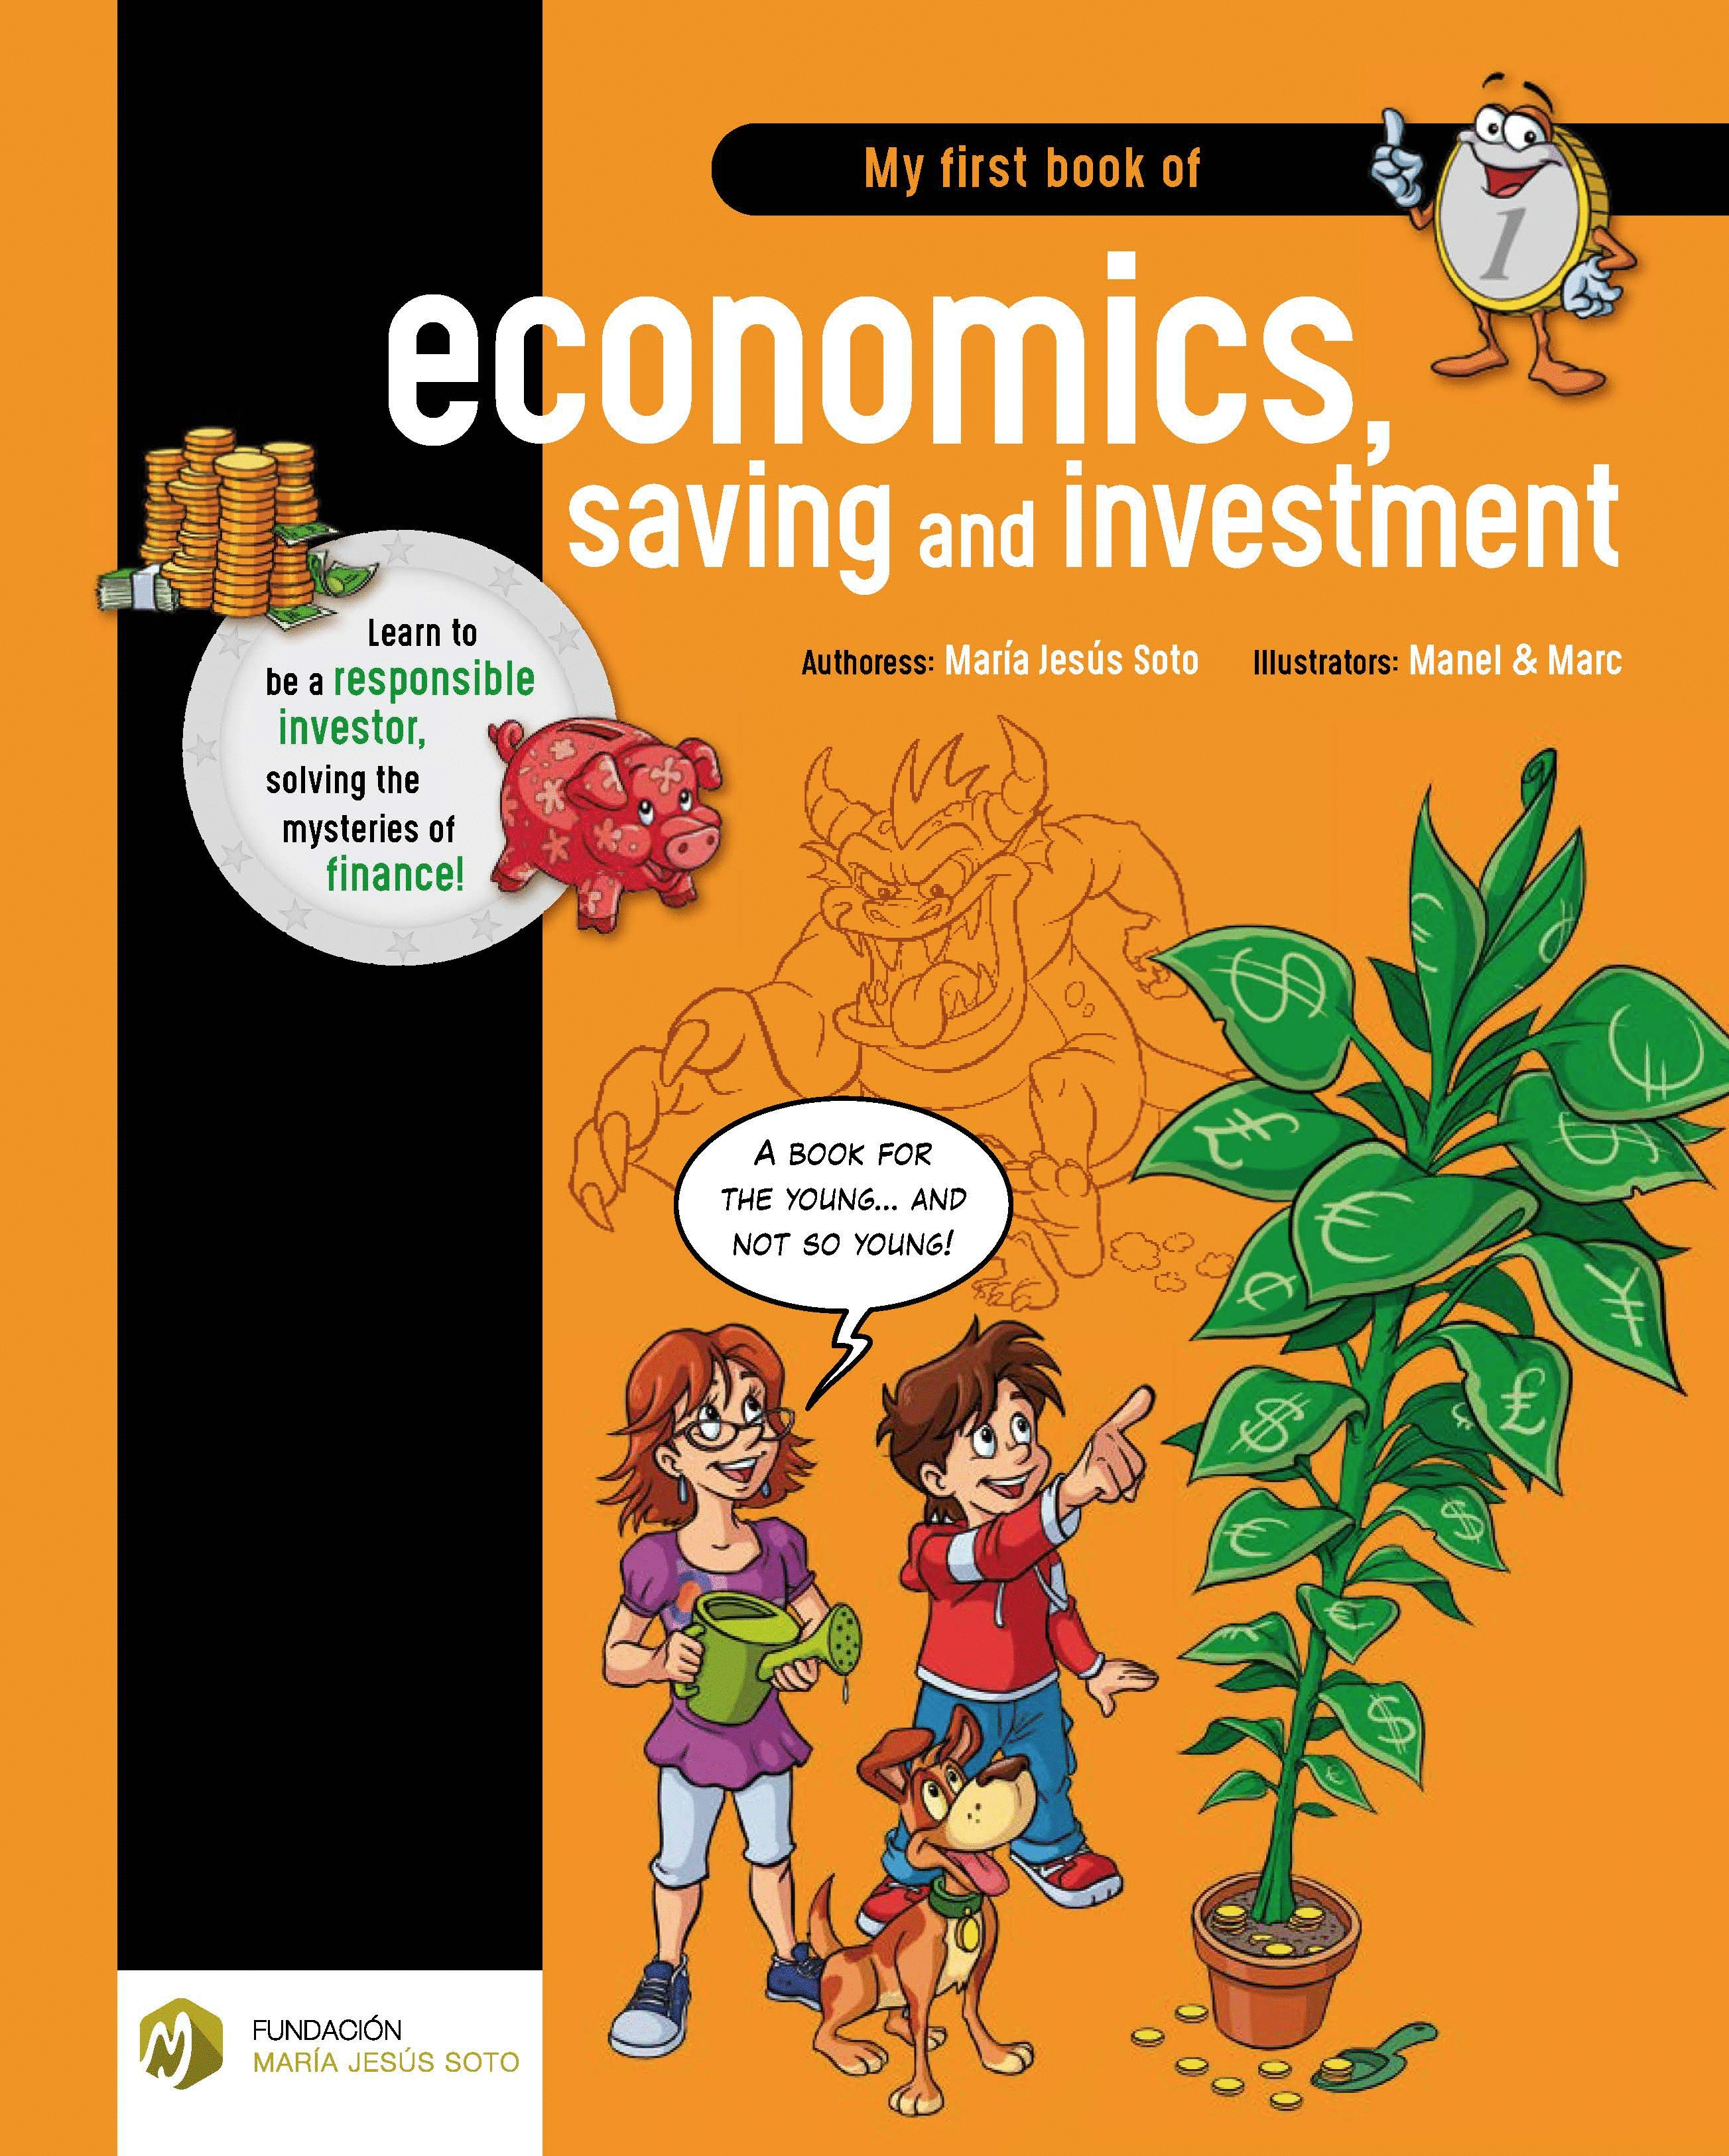 MY FIRST BOOK OF ECONOMICS, SAVING AND INVESTMENT